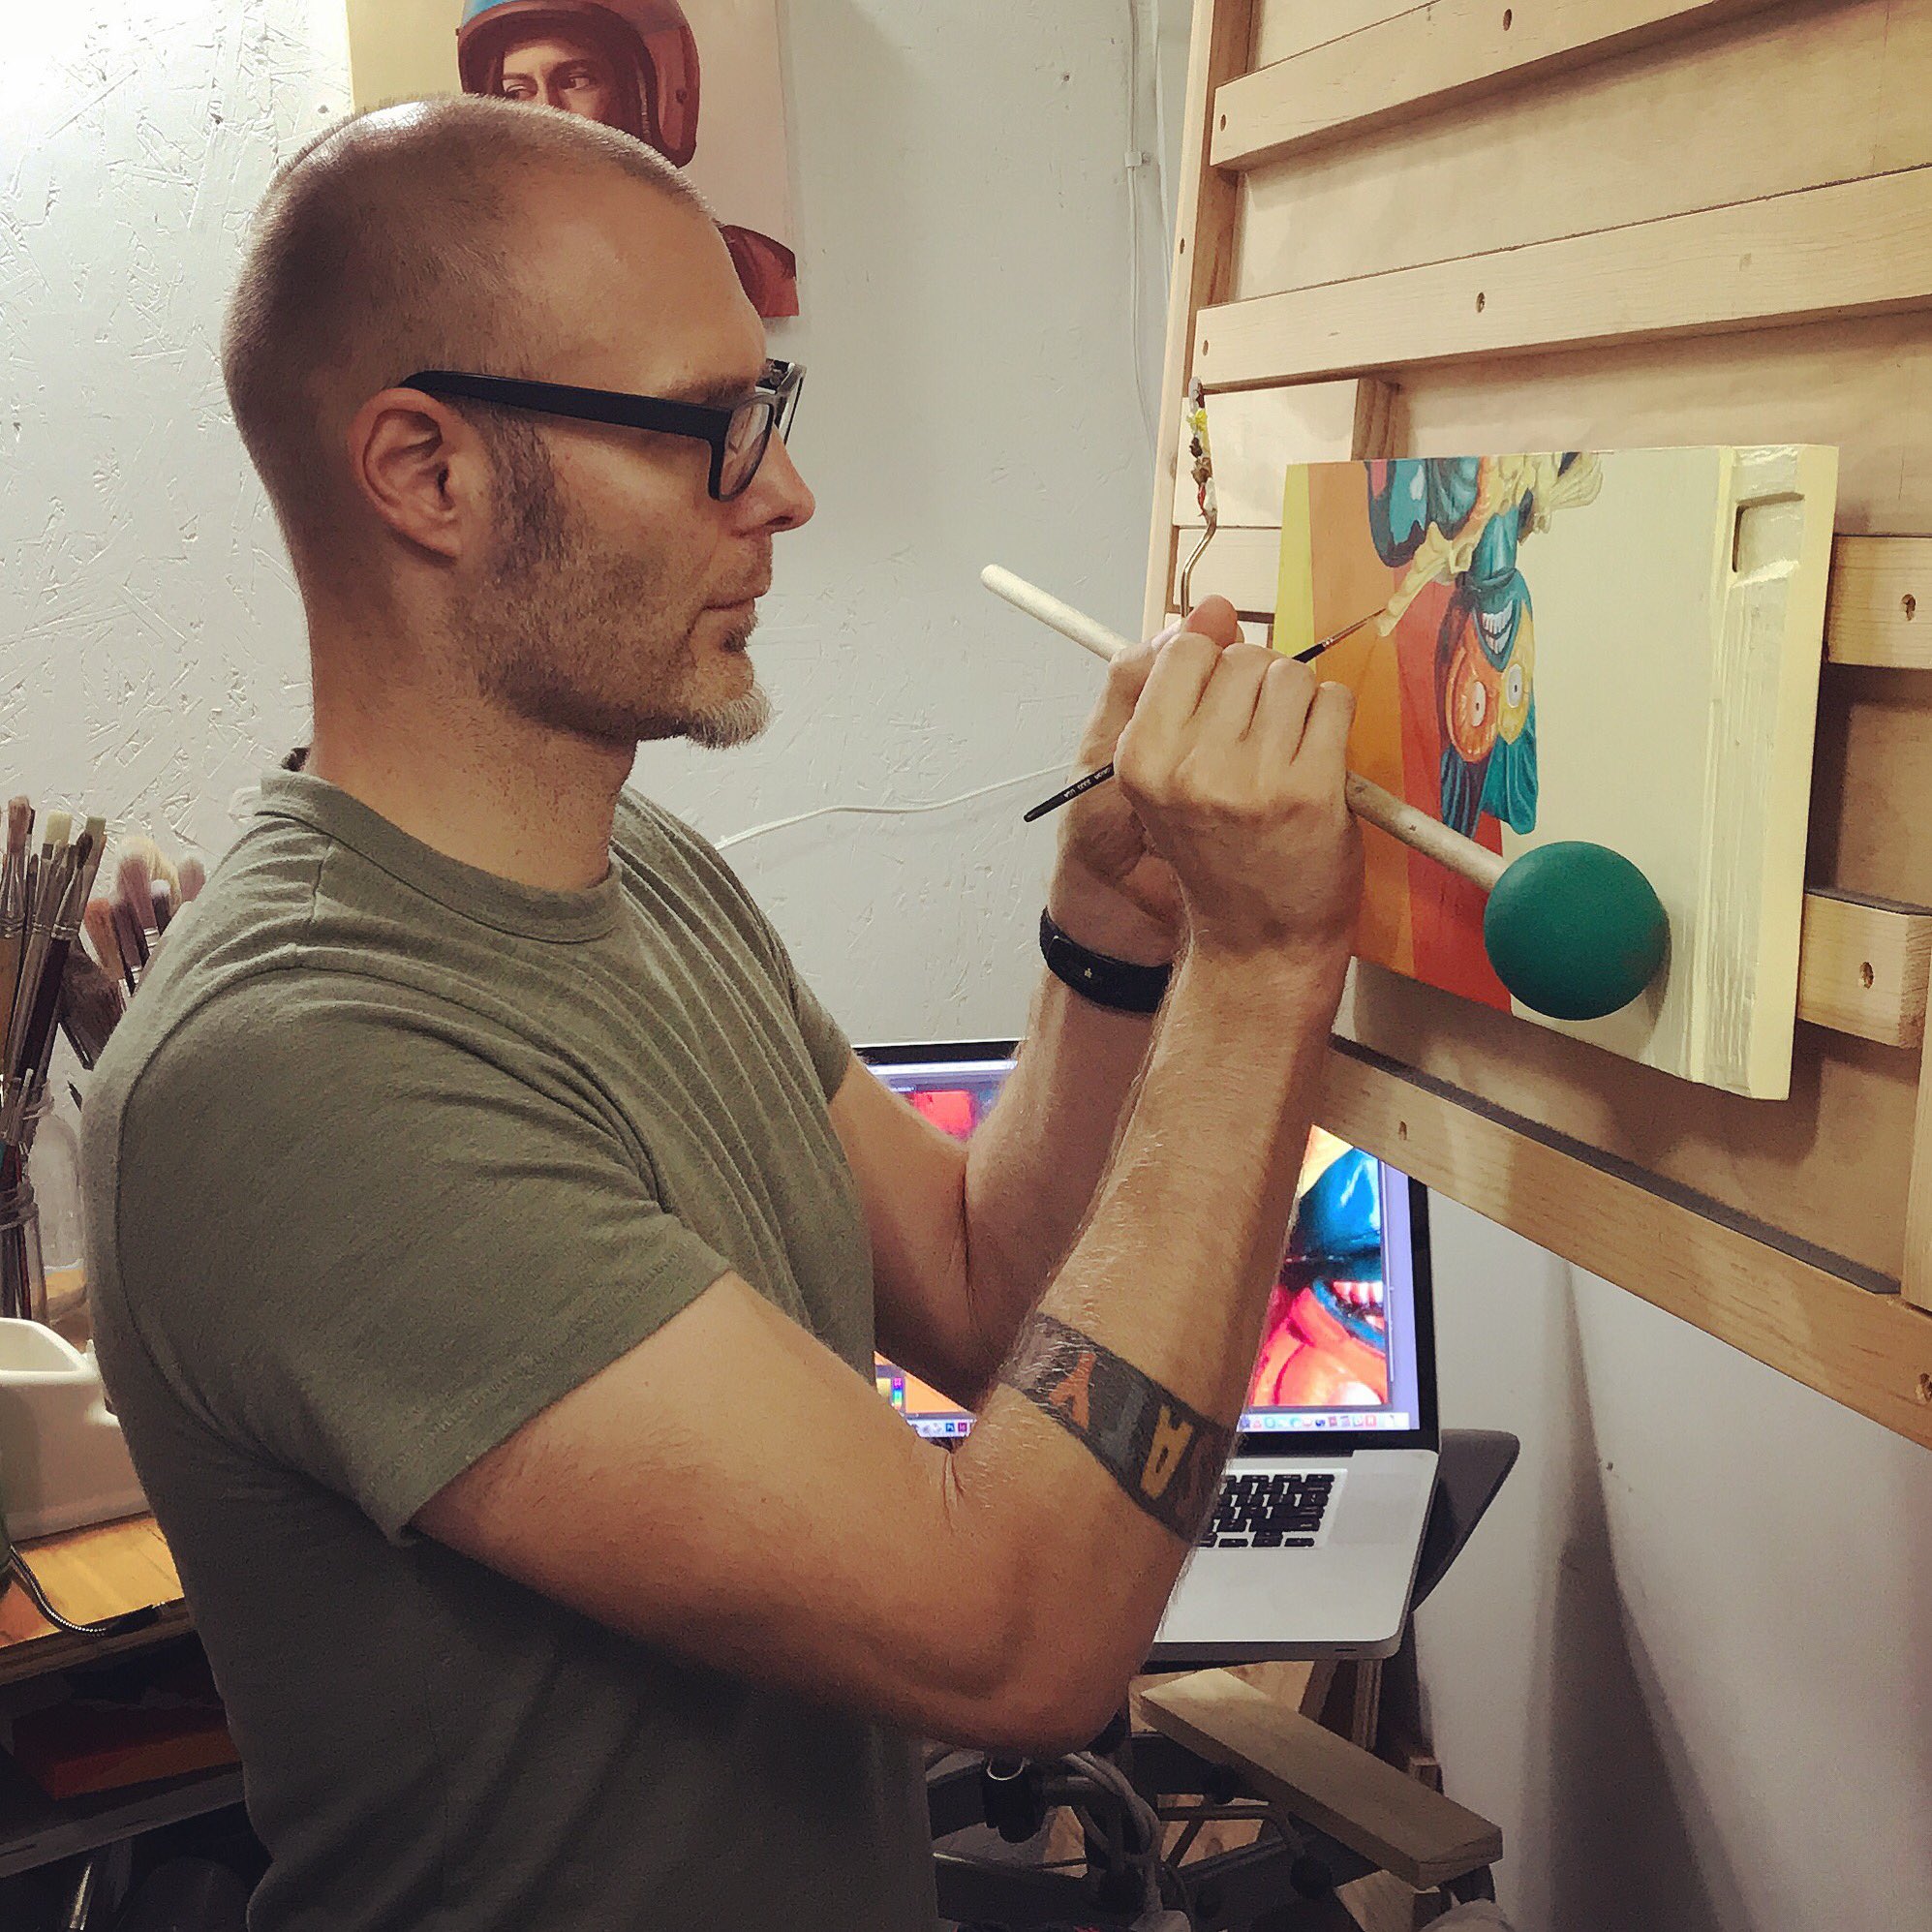 DANKO on X: Putting the final touches on Merman, upside down, with the  homemade mahl stick. Dowel + racquet ball keeps my hand steady and out of  the wet paint. #process #wip #